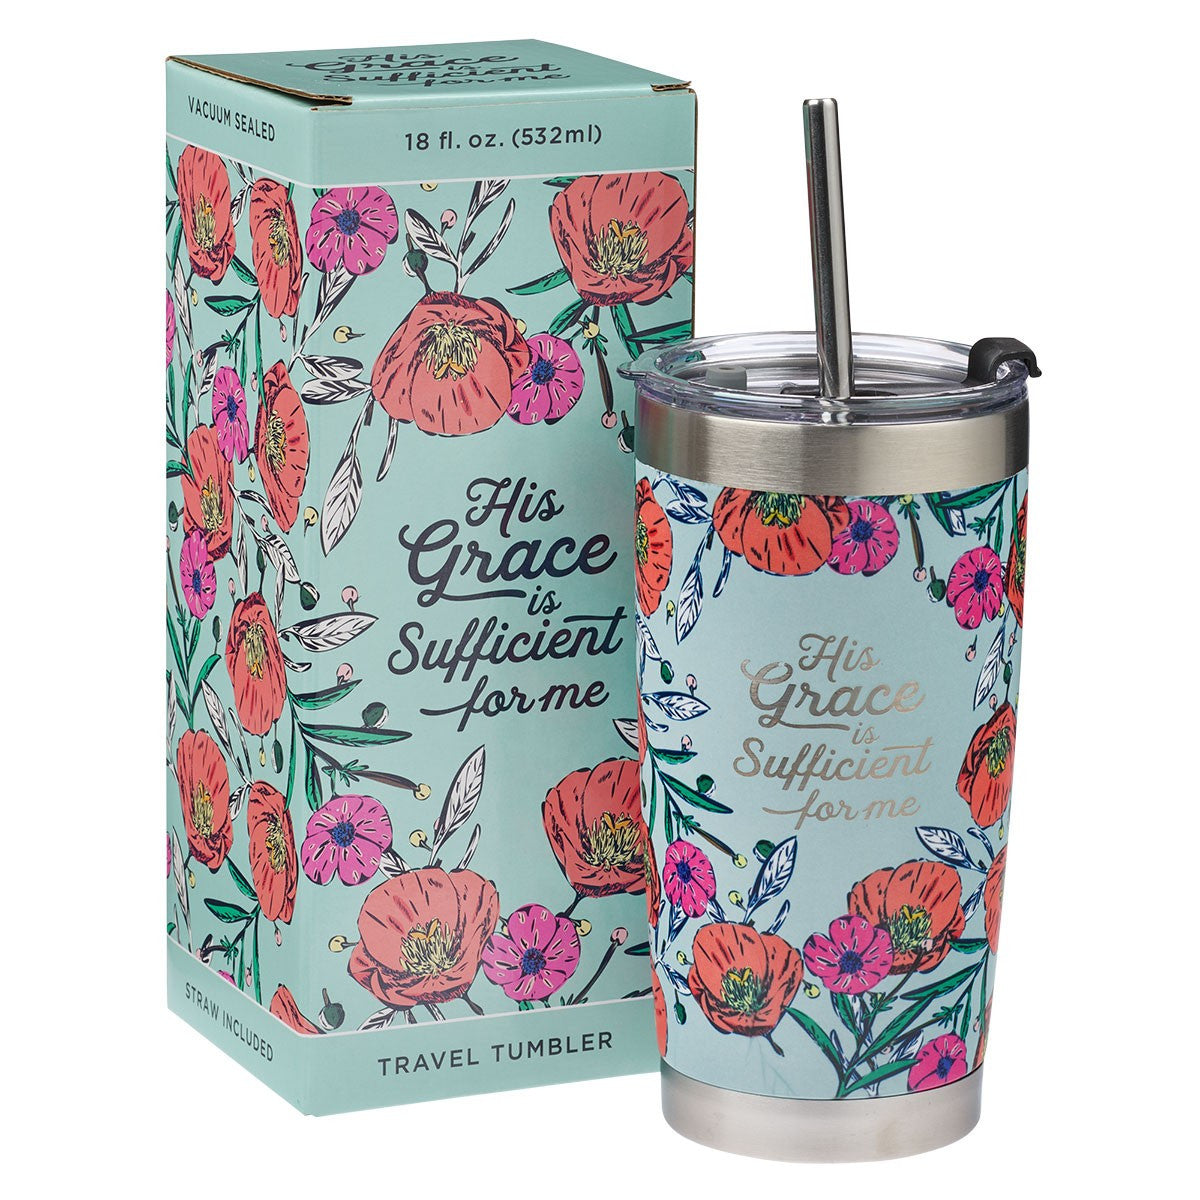 His Grace Stainless Steel Travel Mug With Reusable Stainless Steel Straw - The Christian Gift Company